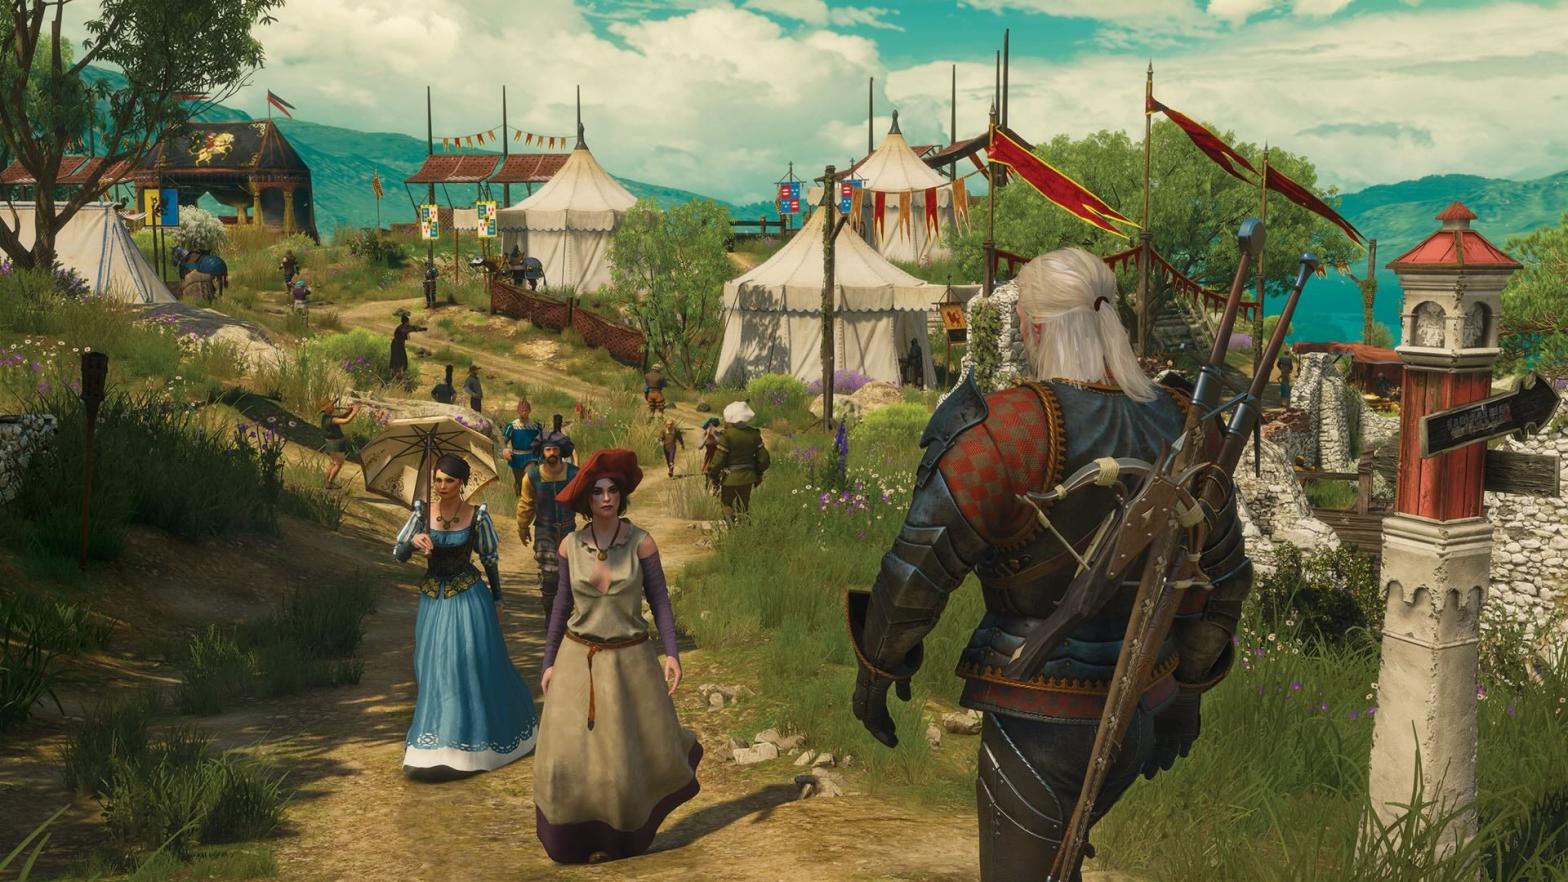 More Than 400 People Now Working On The Witcher 4, CDPR Confirms